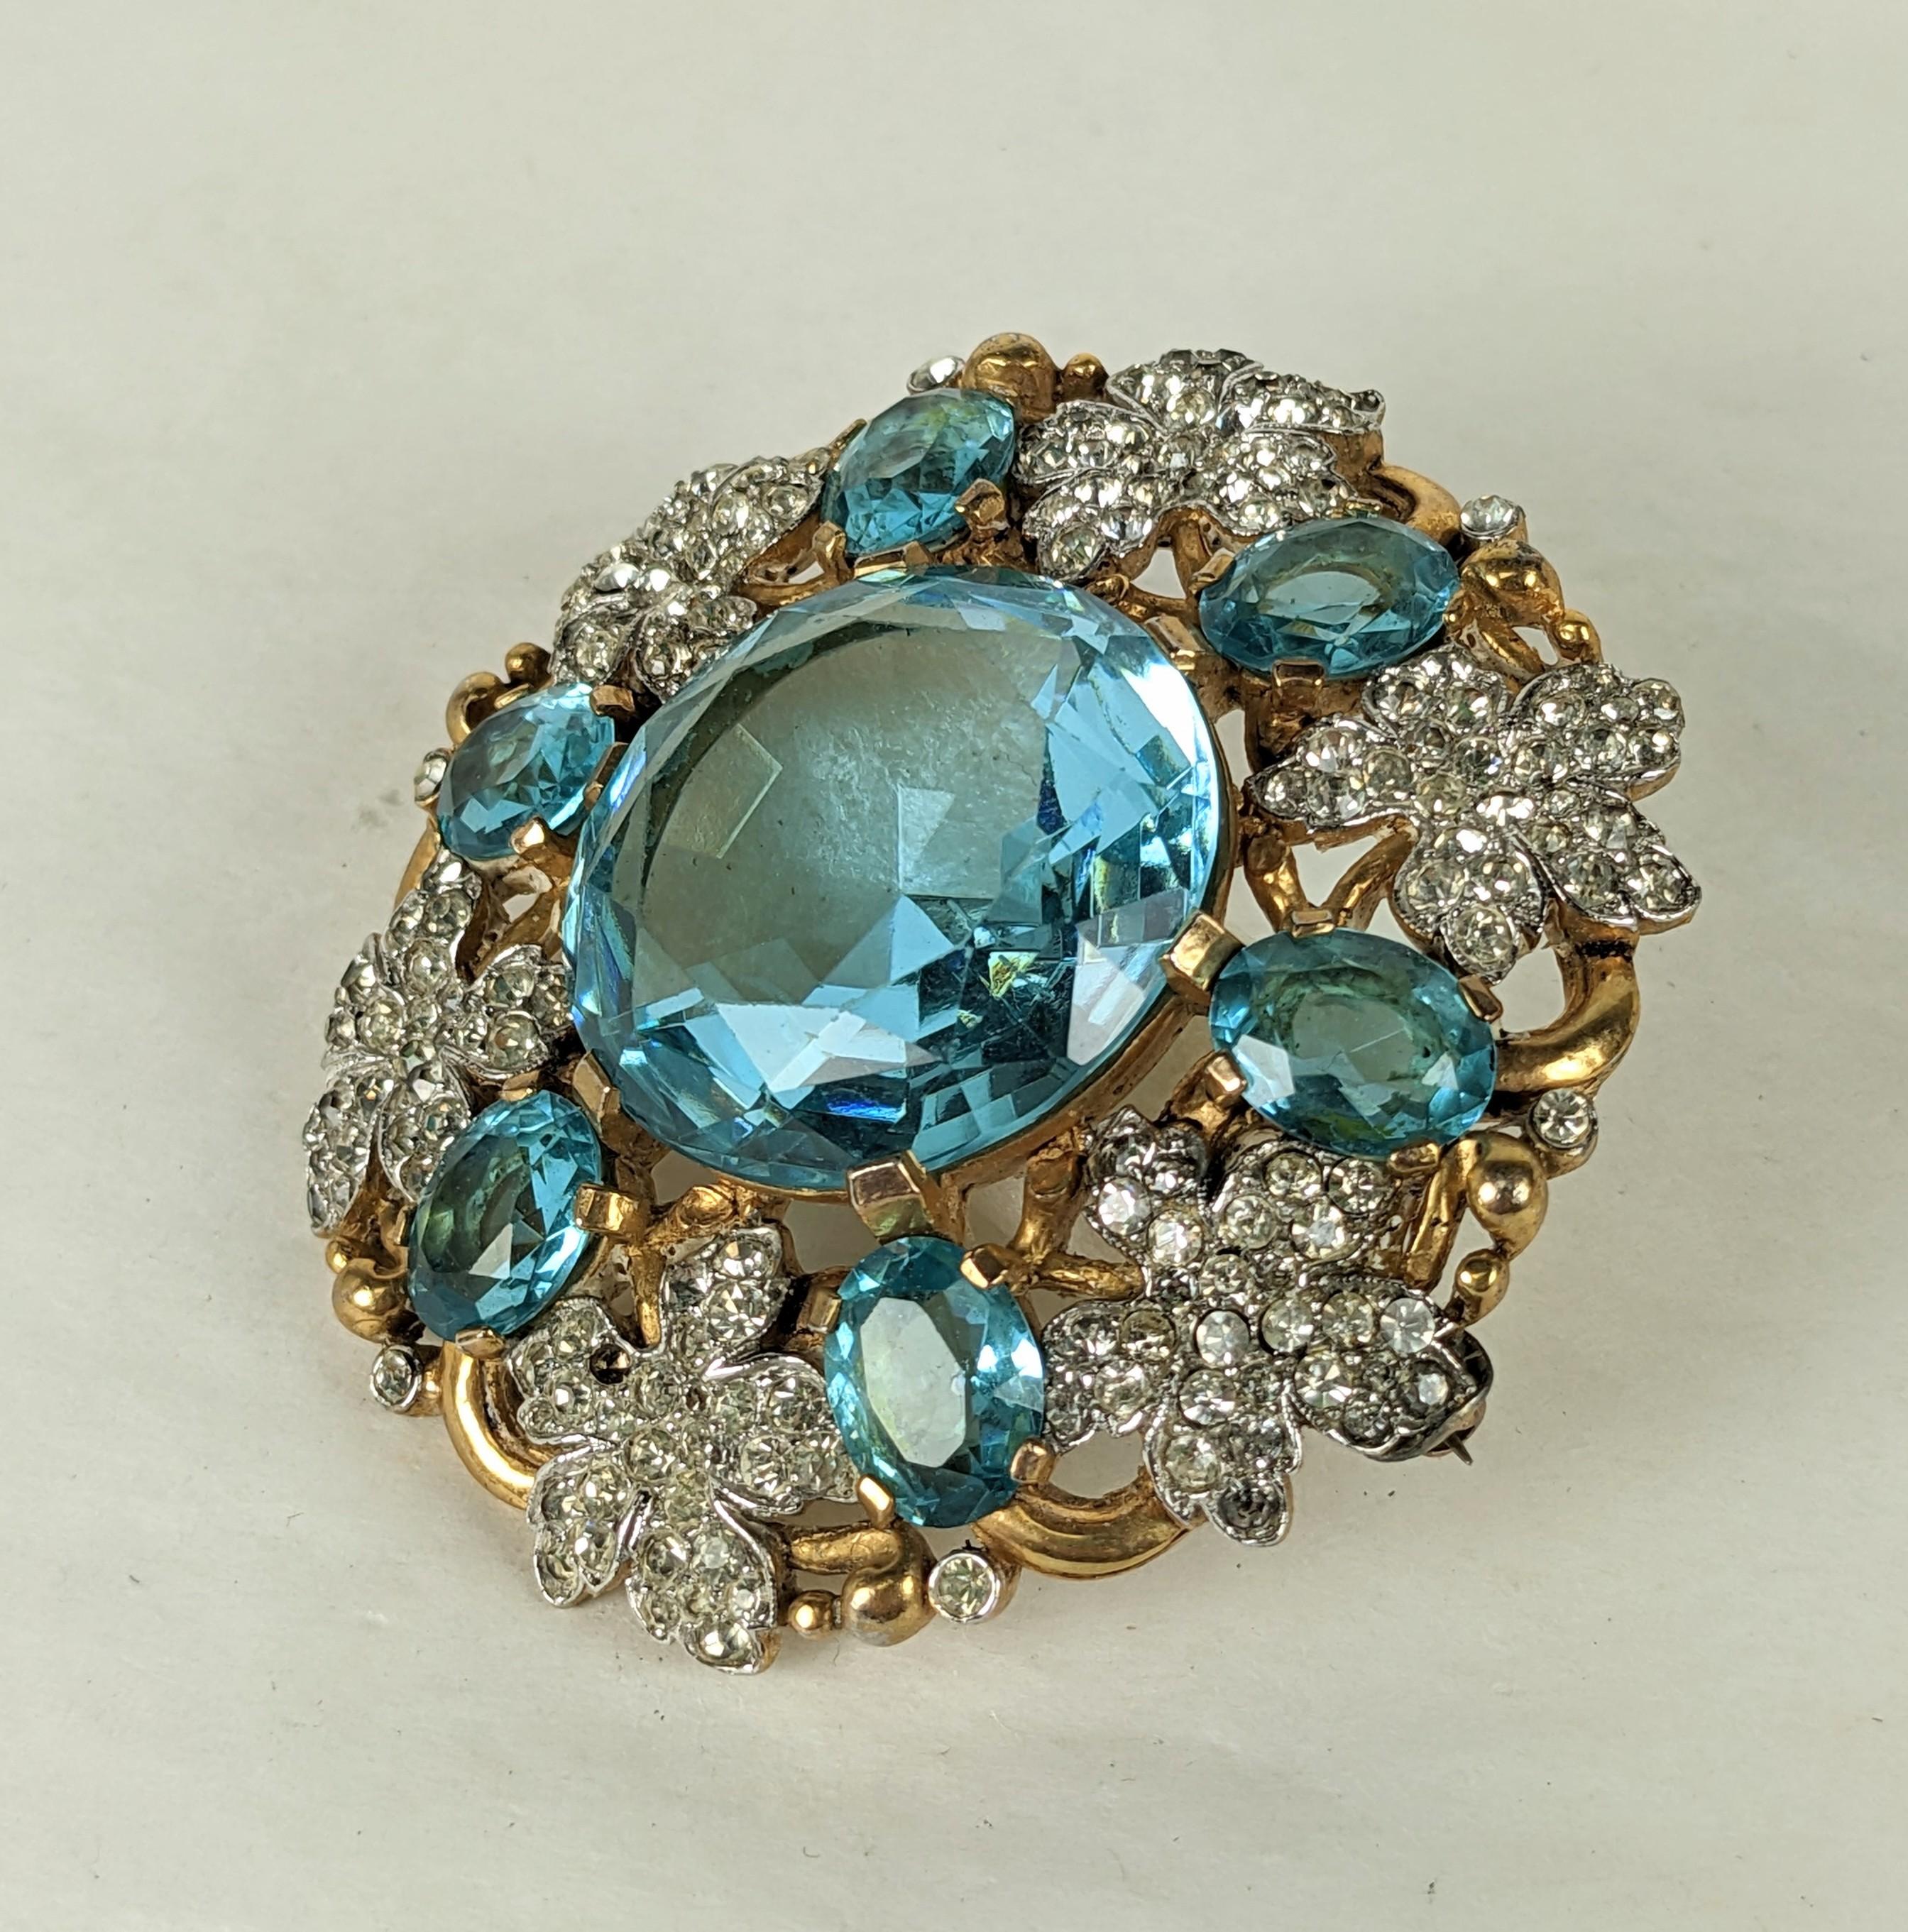 Collectible and rare Trifari Eugenie Series Aquamarine Crest brooch. Large scale with pave leaves set in rhodium with gilt metal vines set with large faux aquamarines. 
Large, extravagant Retro design is dimensional and striking. 1940's USA. 2.5